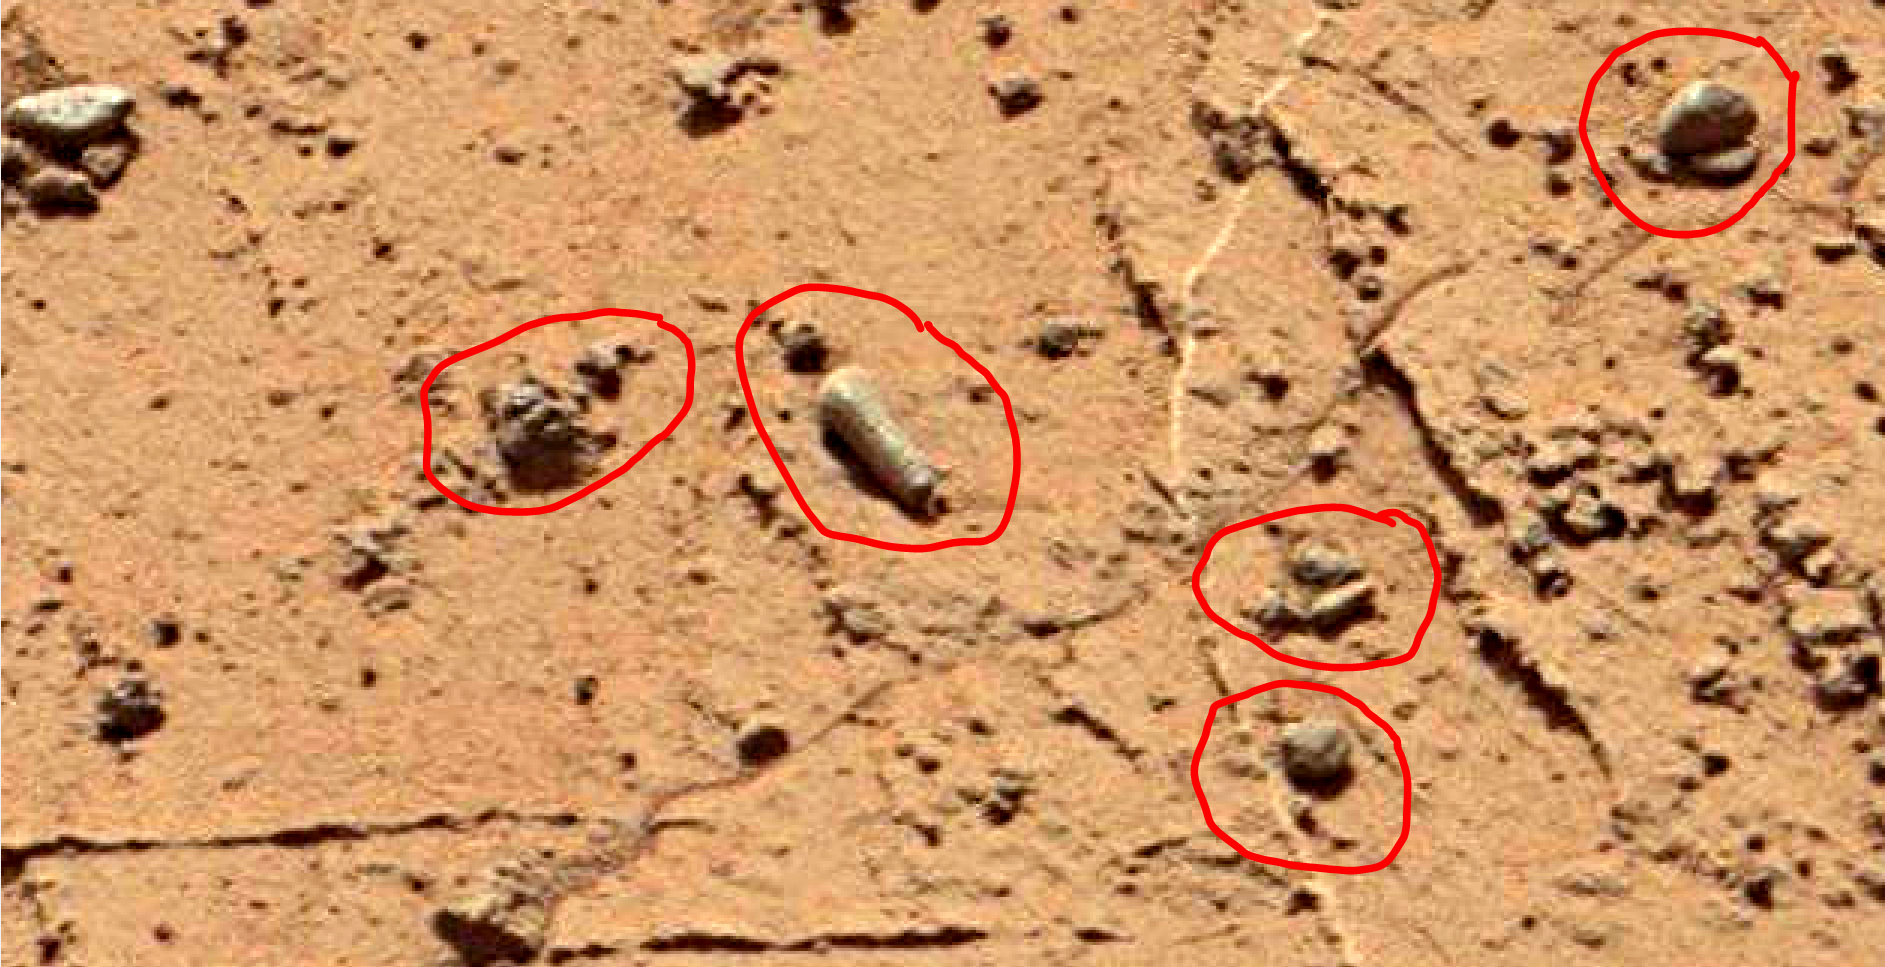 mars-sol-1456-anomaly-artifacts-2a-was-life-on-mars